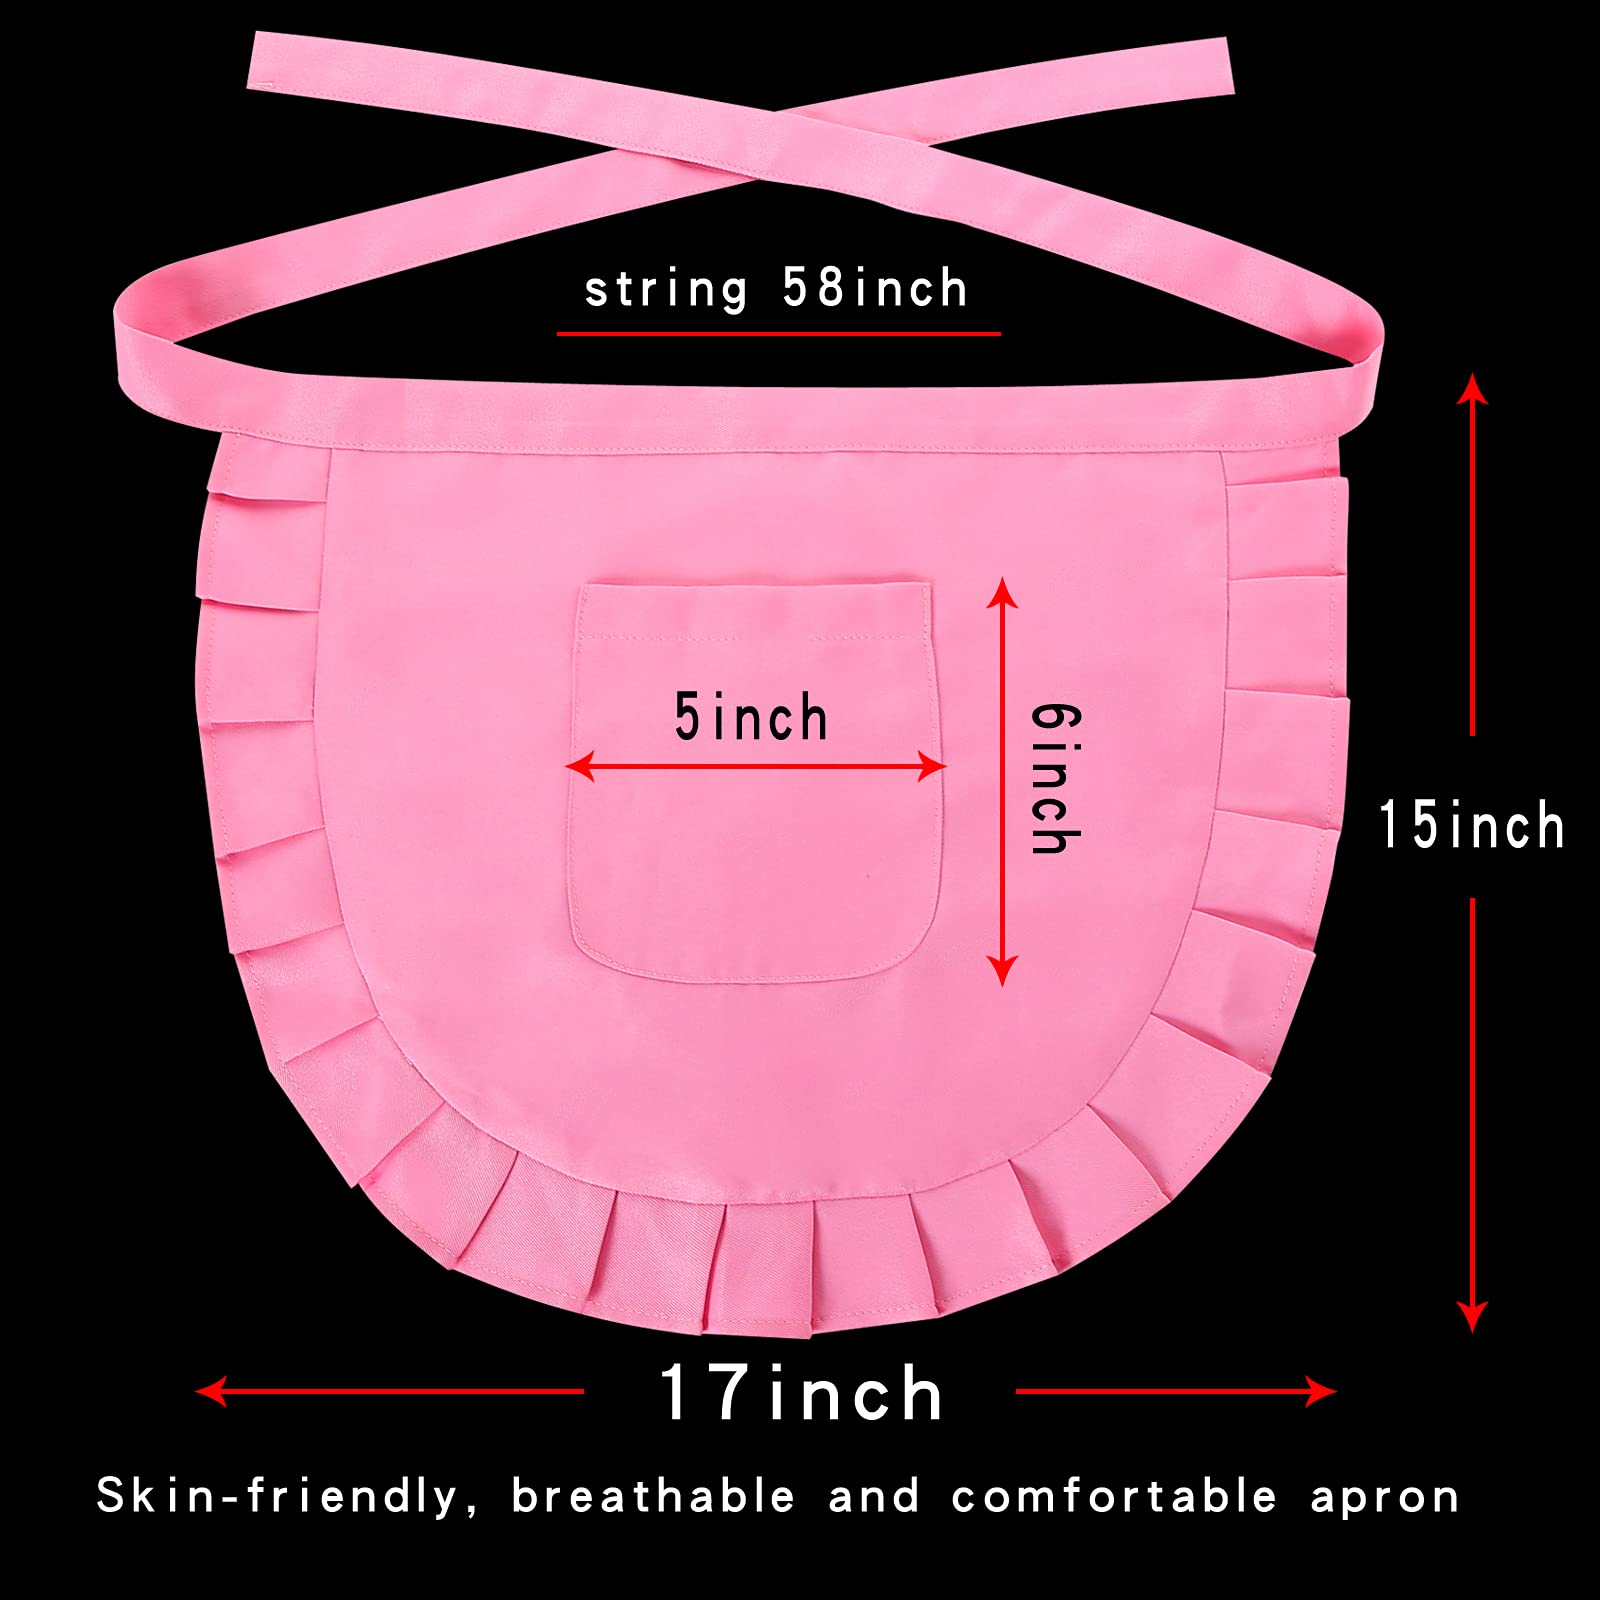 SUN2ROSE Girls Cosplay Waist Apron Tight Costume, Cotton Half Apron Kitchen Party Favors Also Fits for Kids Apron Cosplay (pink)